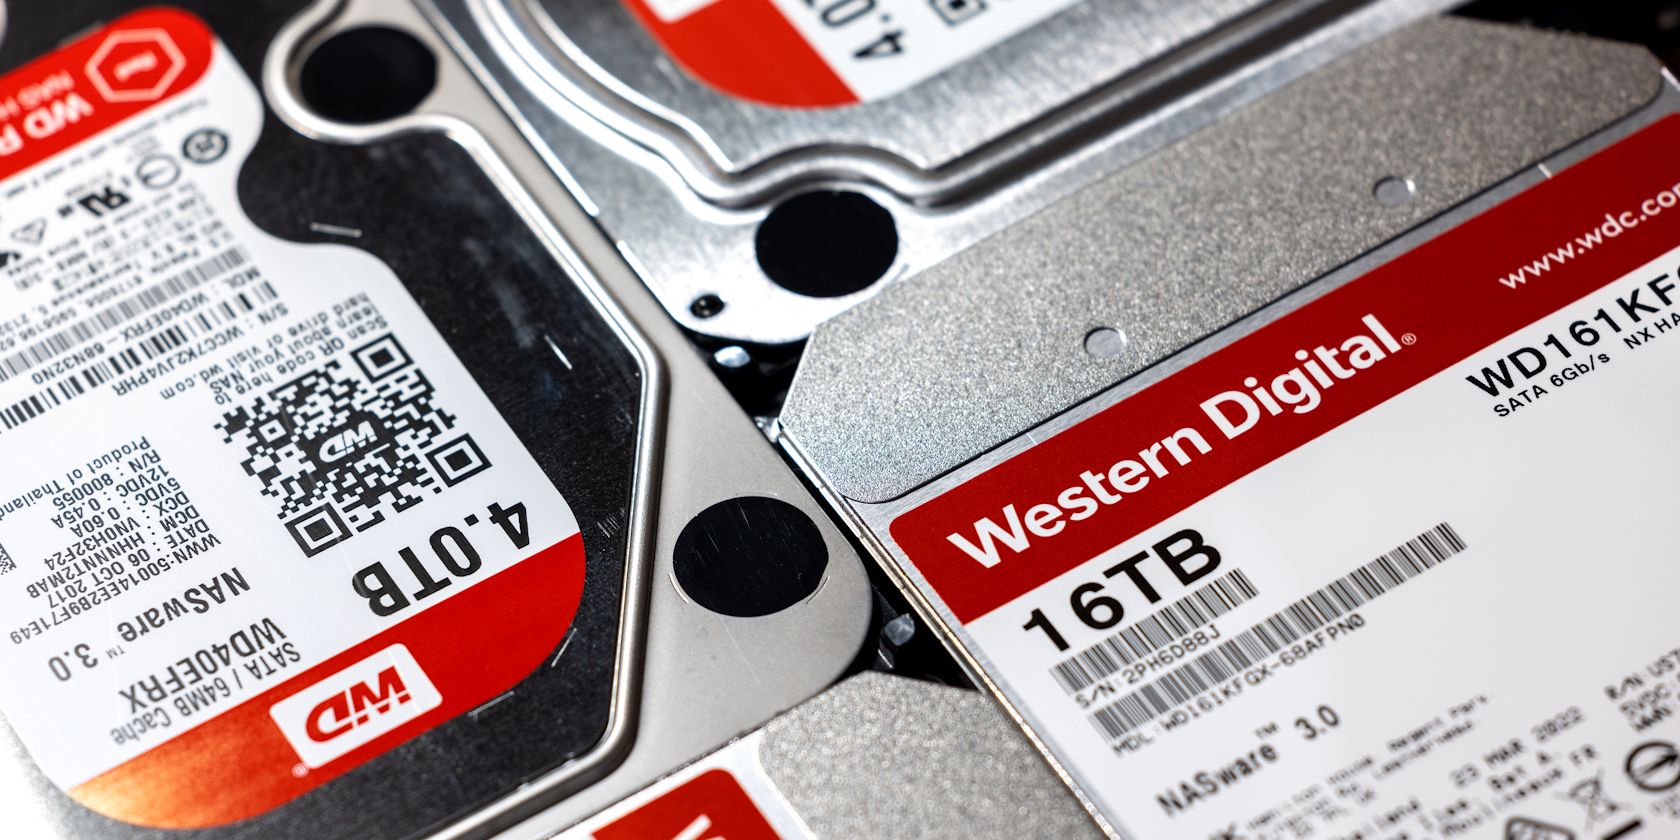 western digital nas drives with high capacities pushed together as a grid